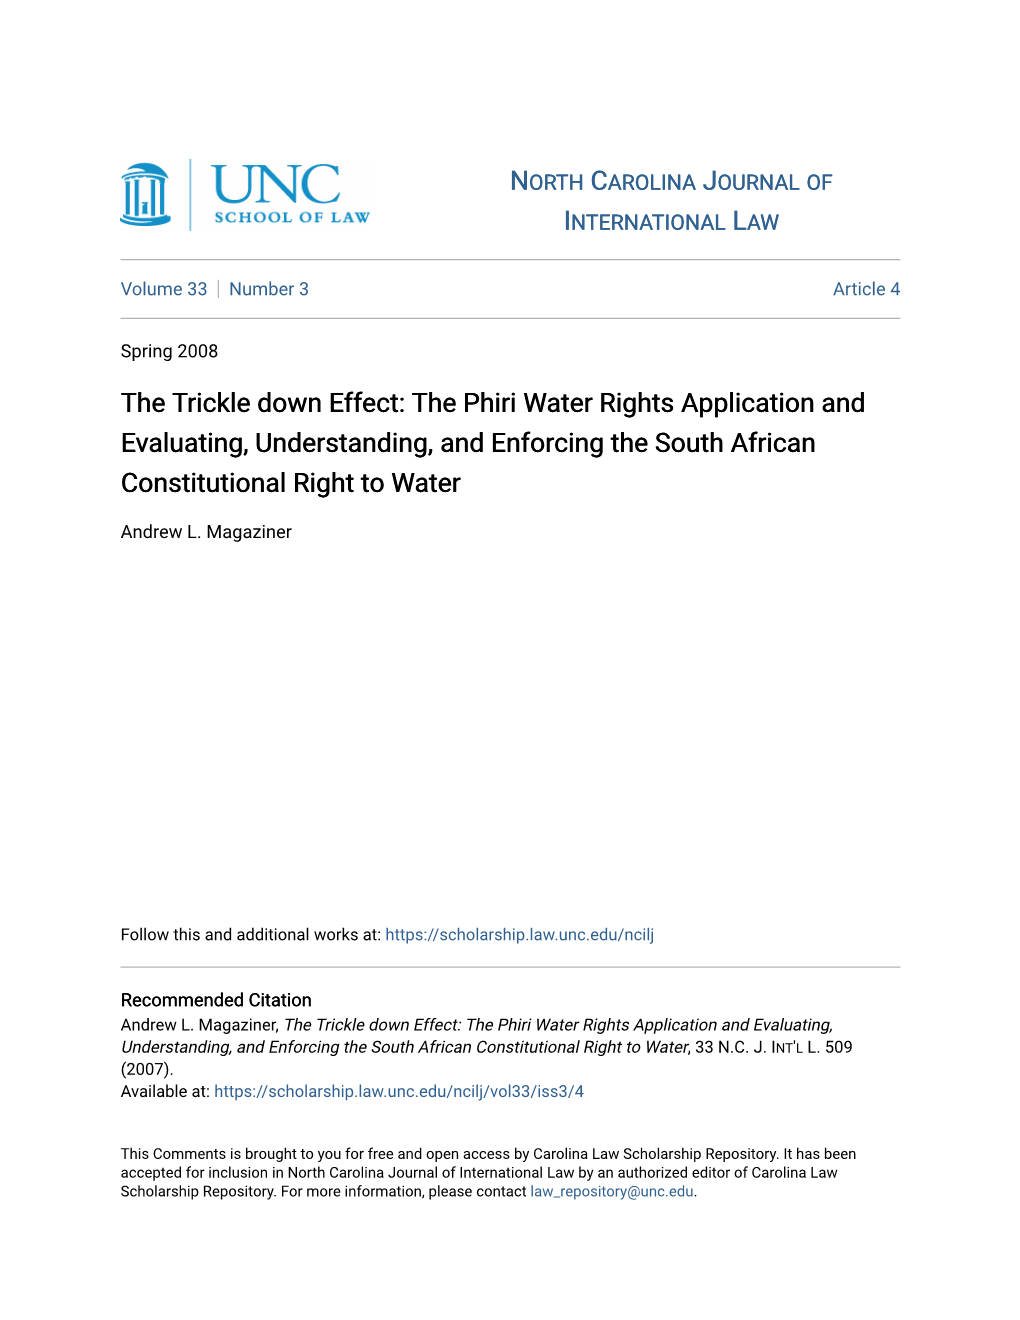 The Phiri Water Rights Application and Evaluating, Understanding, and Enforcing the South African Constitutional Right to Water